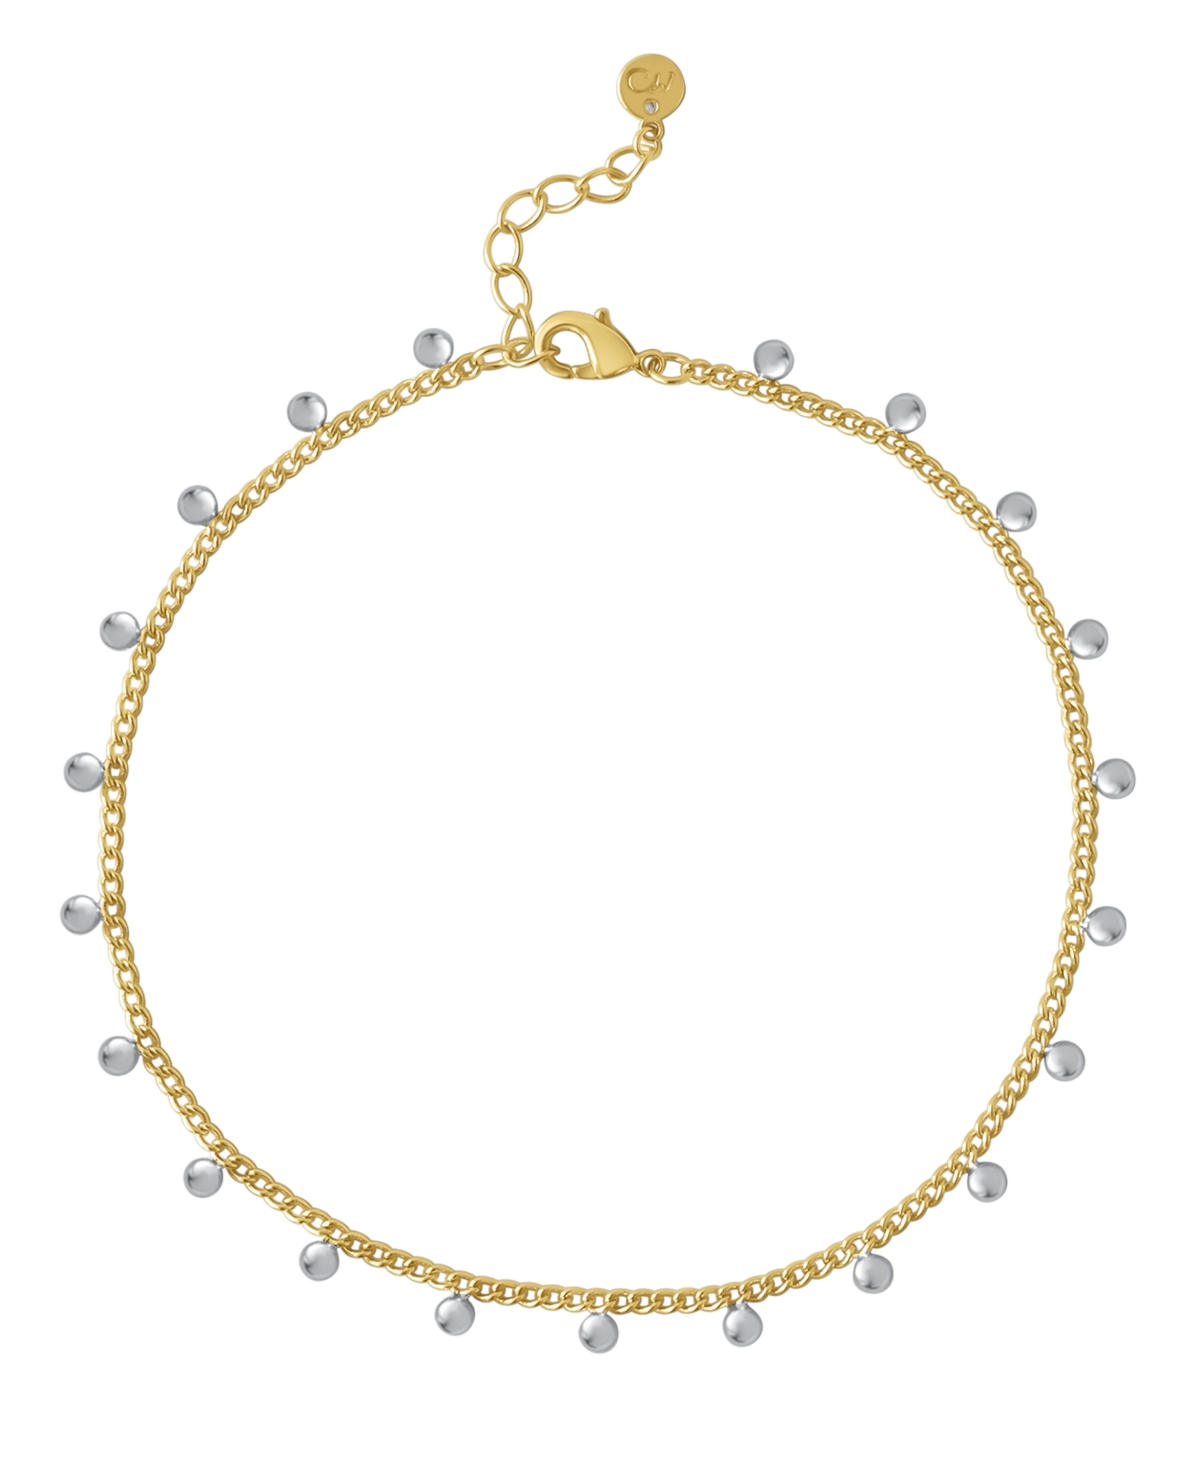 Silver Plated and 18K Gold Plated Ball Anklet - K Gold Plated Over Brass